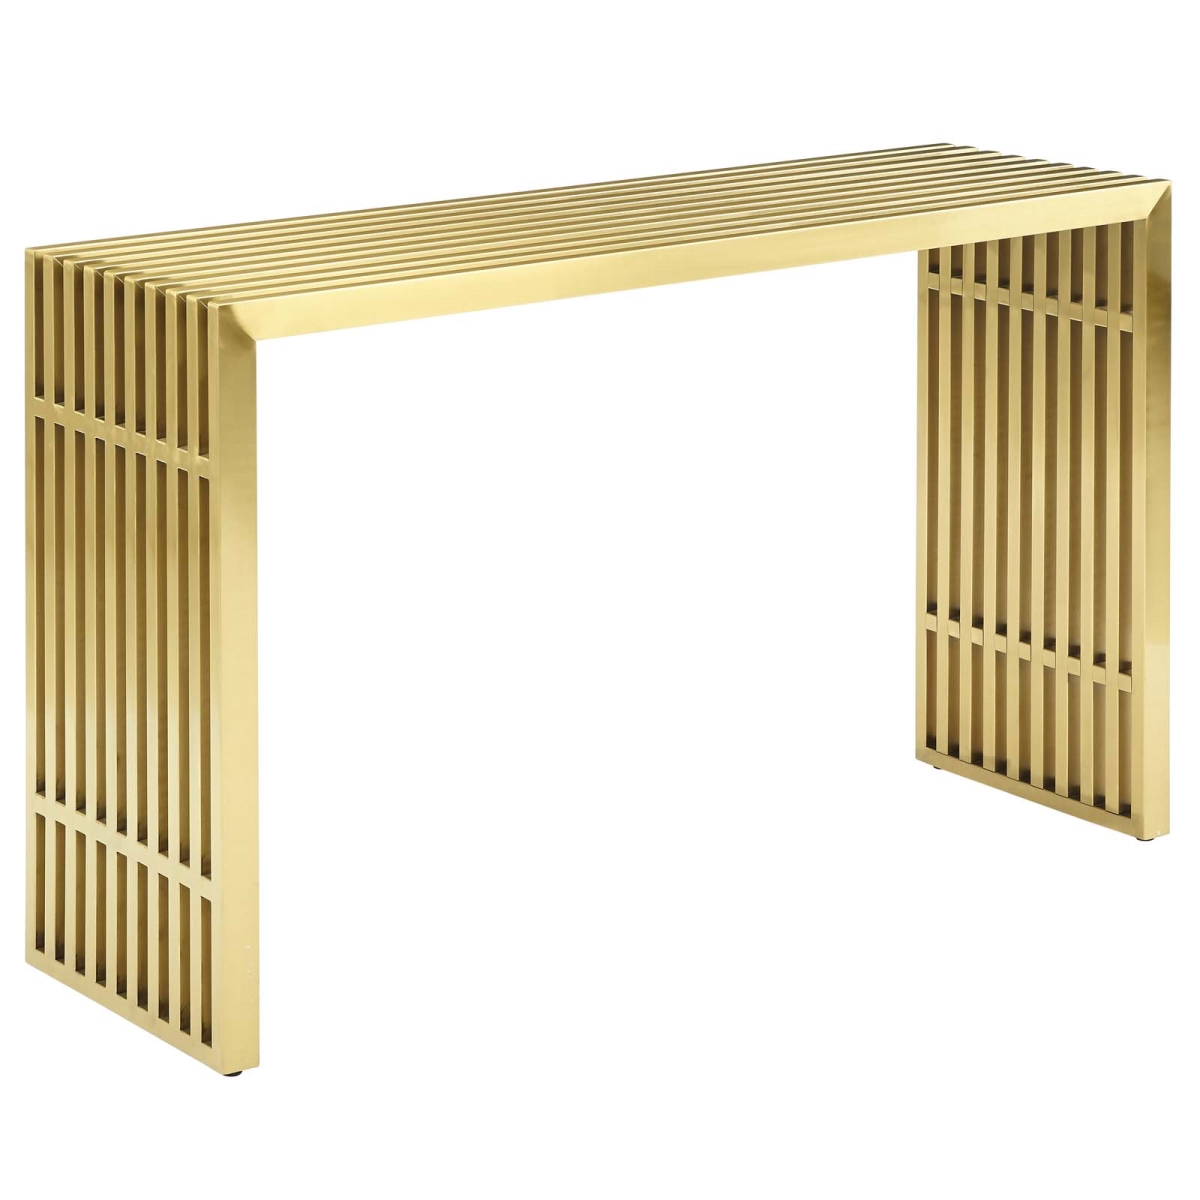 Eei-3036-gld Gridiron Stainless Steel Console Table - Gold, 29 X 15 X 46.5 In.